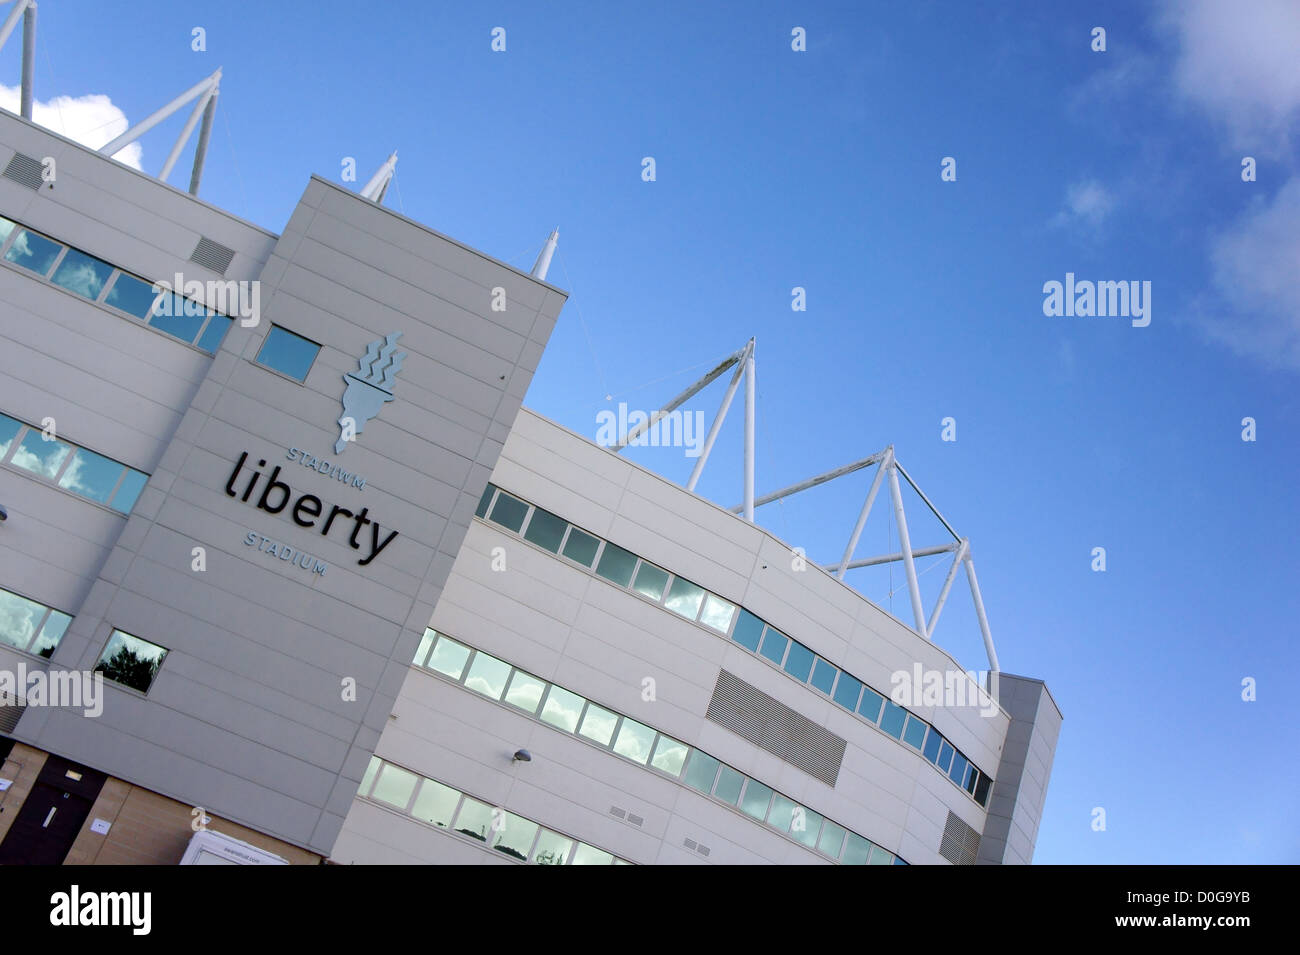 Liberty Stadium, Swansea, home ground of Swansea City Football Club and the Ospreys Rugby Team, South Wales, UK Stock Photo